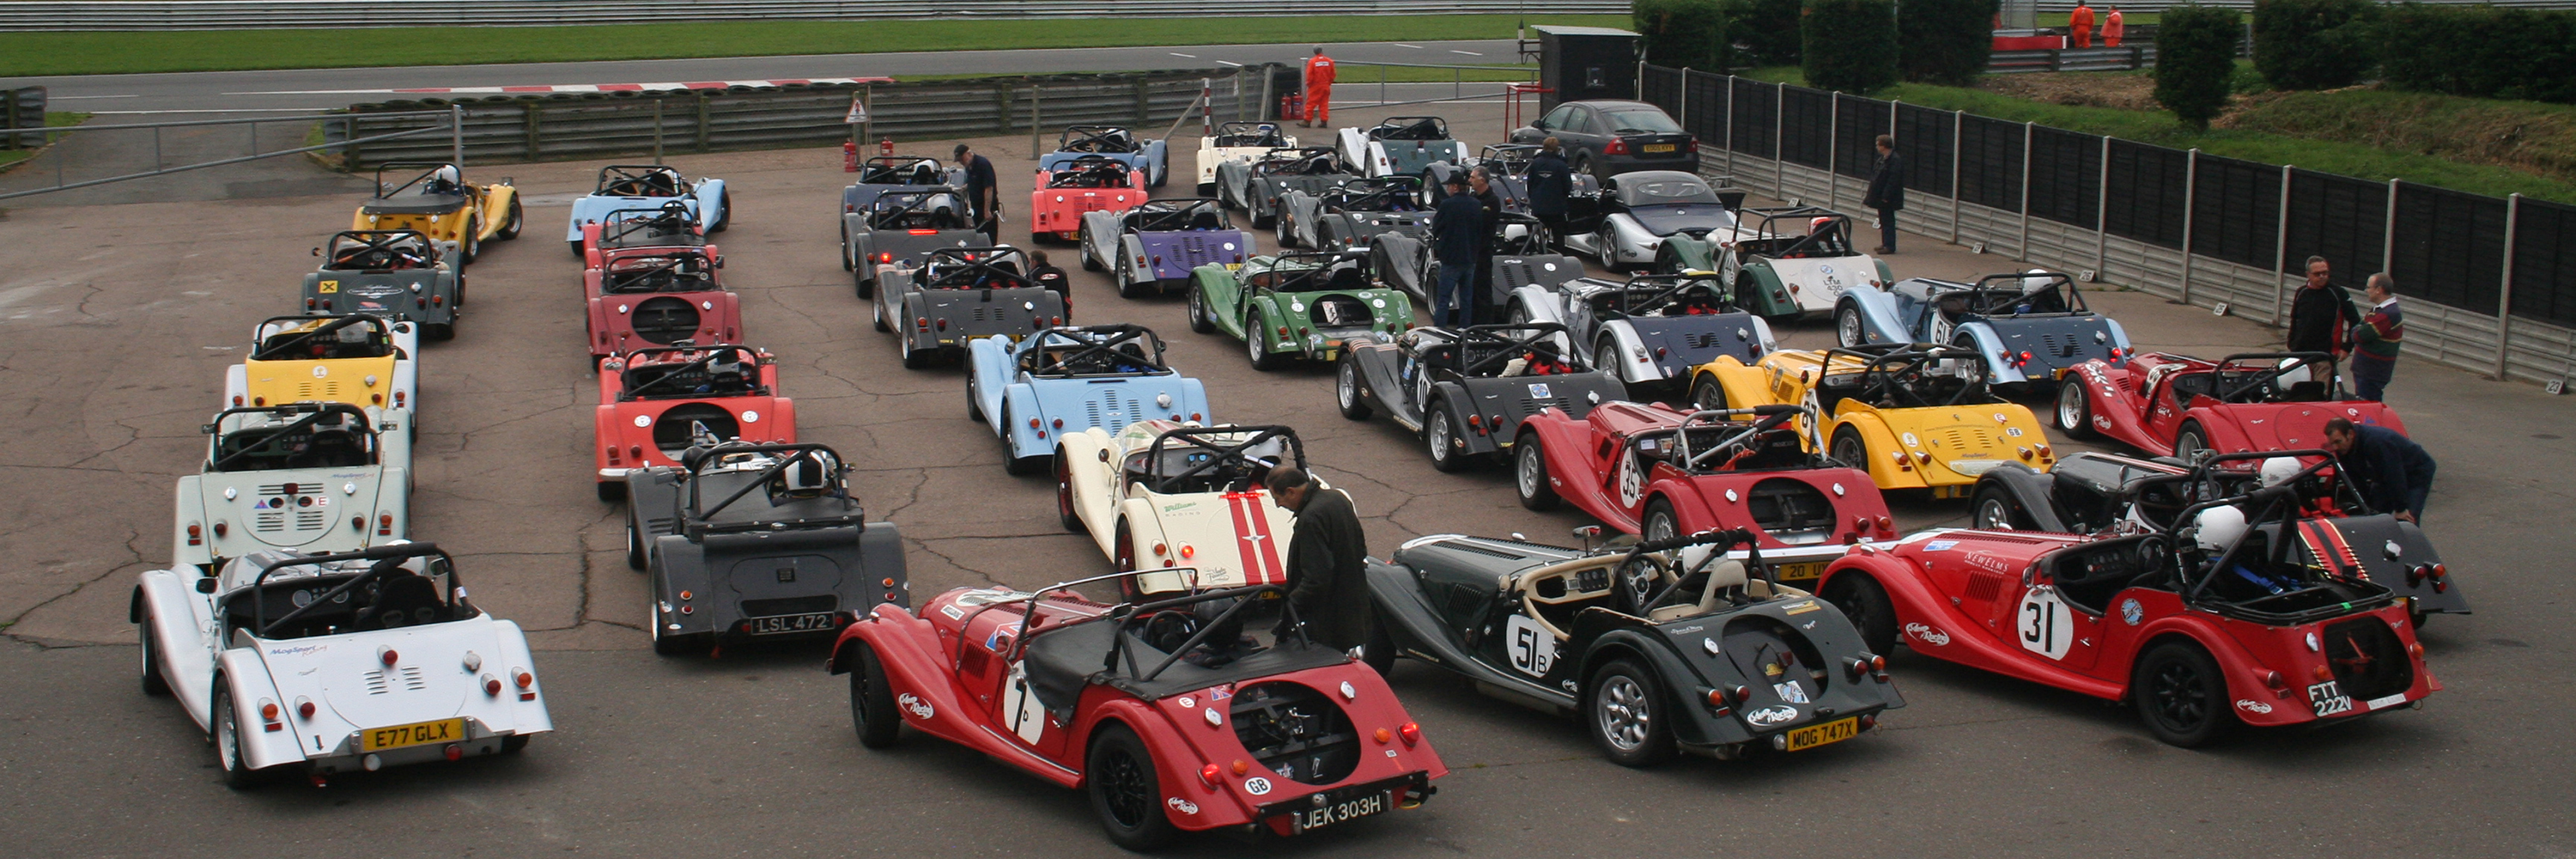 Morgan Challenge competitors in the collecting area at Snetterton